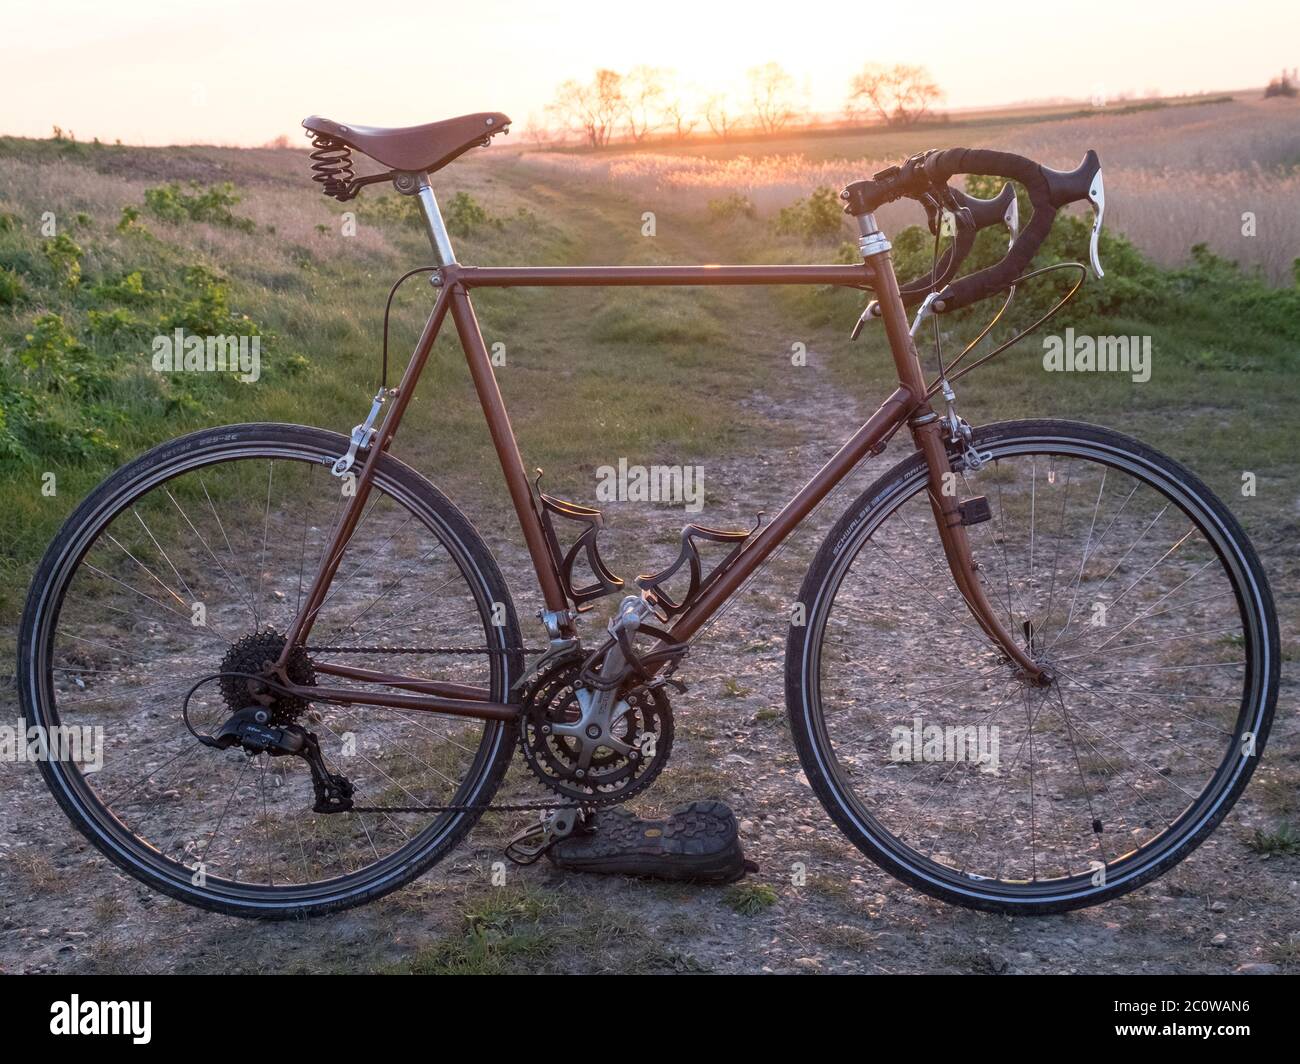 A classic racing bike on a gravel trail in the countryside. Stock Photo